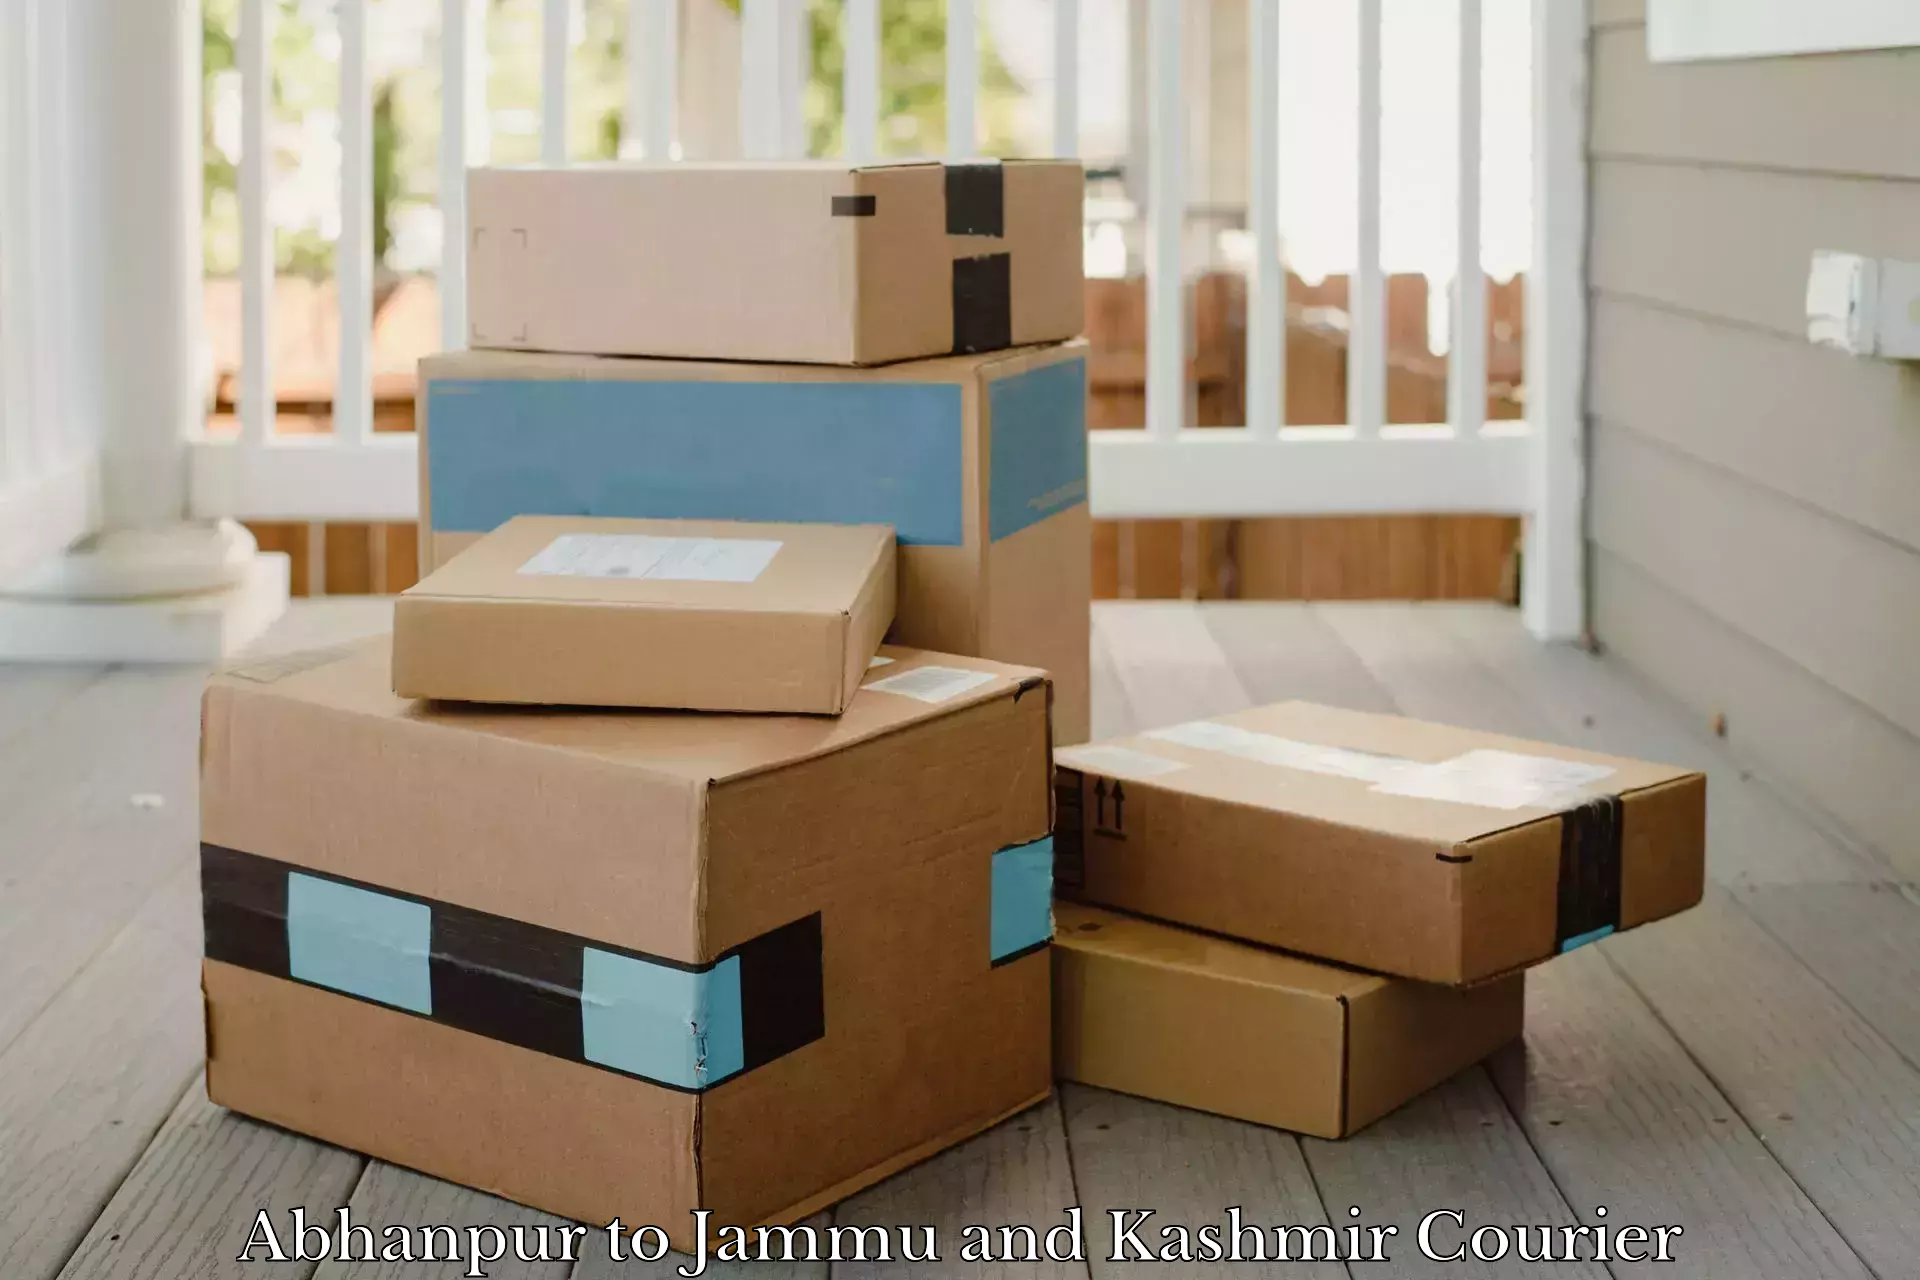 International courier rates Abhanpur to Jammu and Kashmir